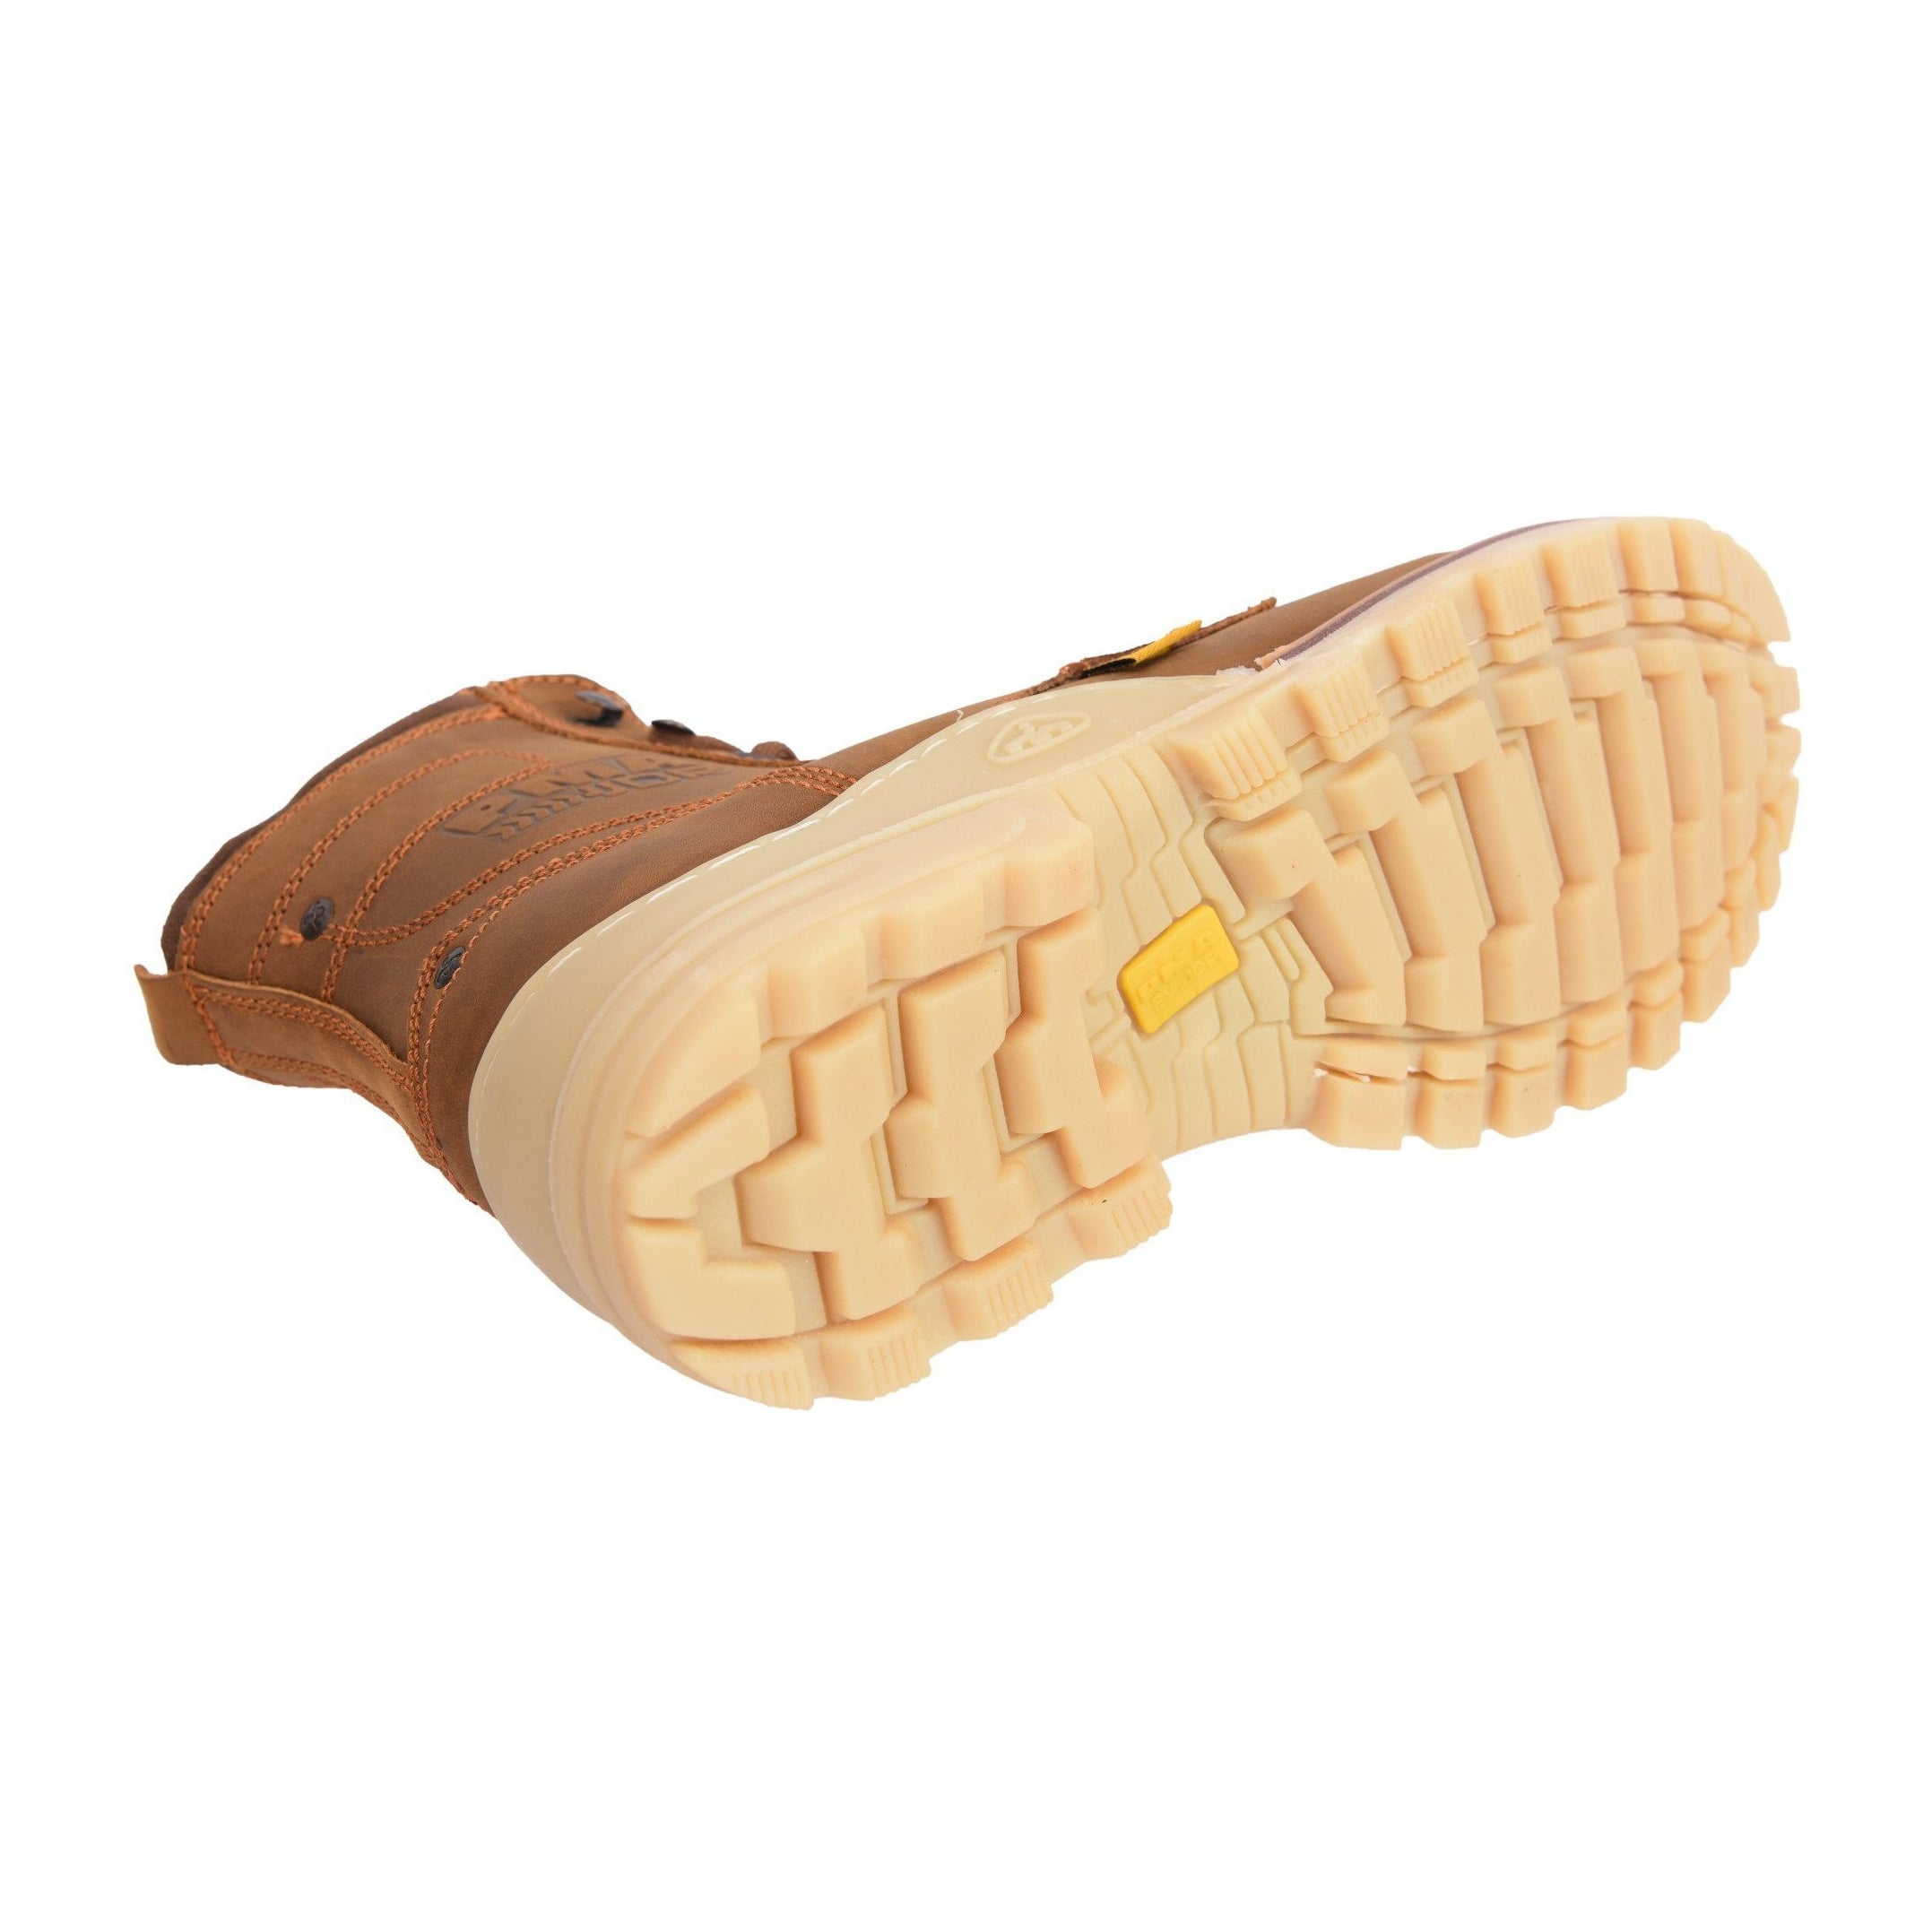 Pma957 Natural Work Boots Heave Duty